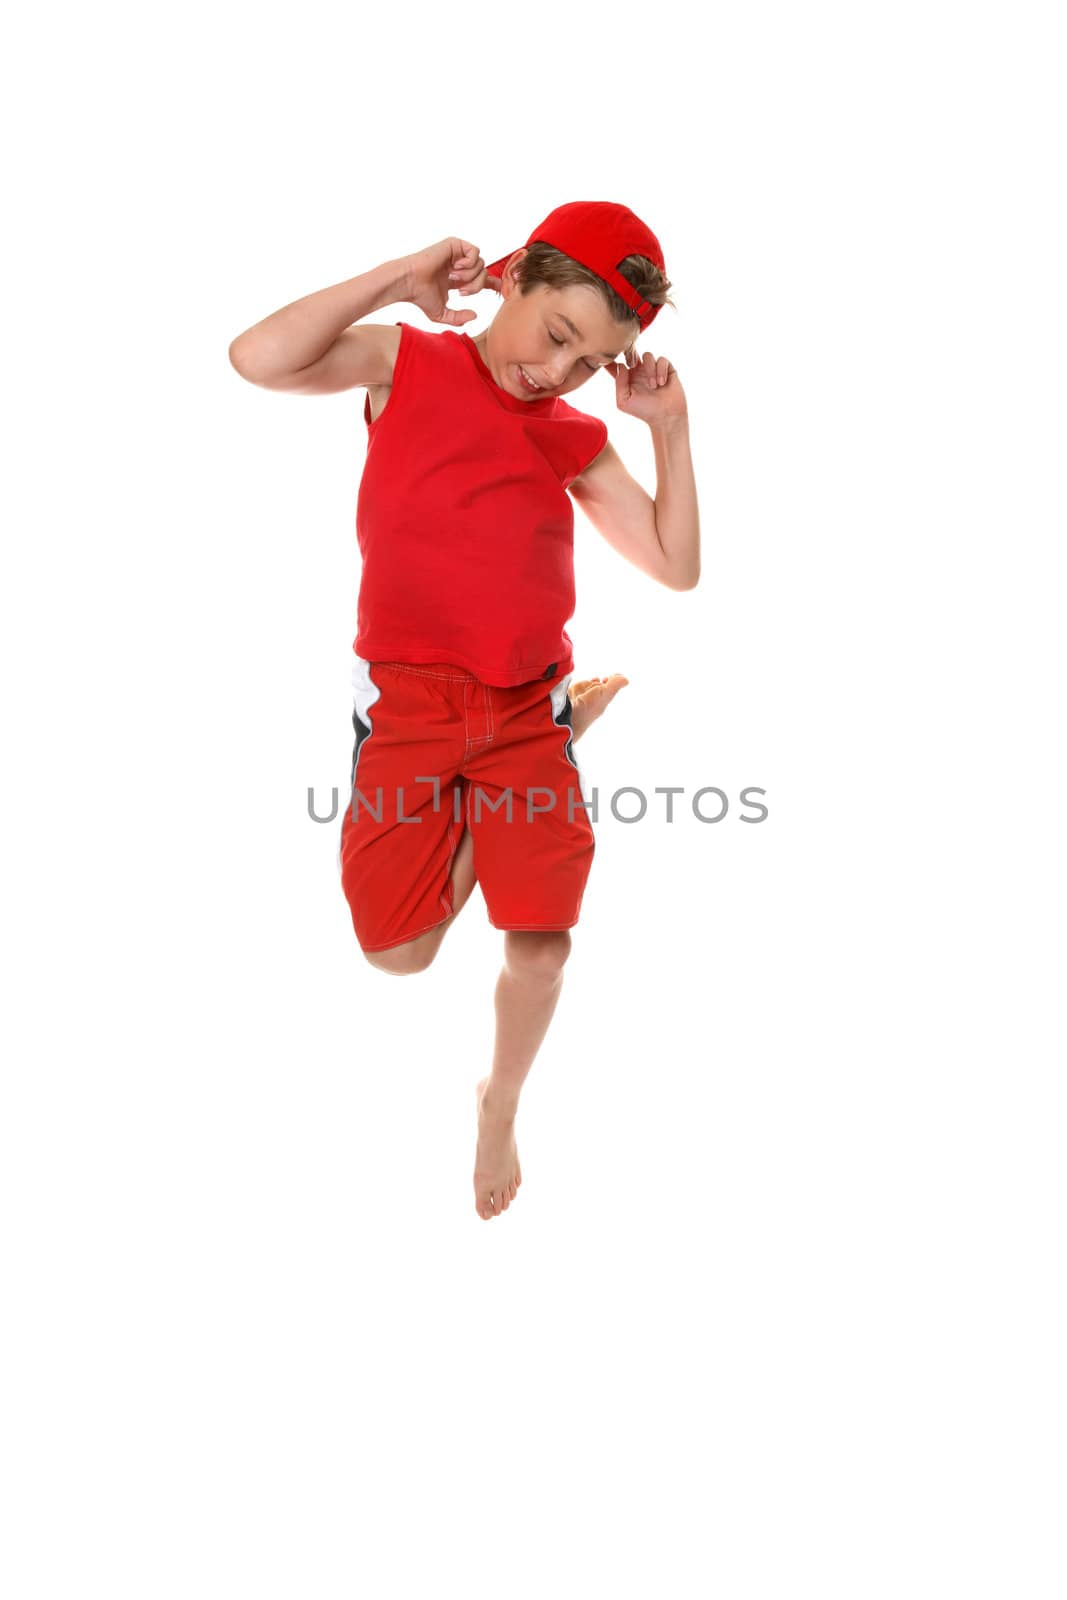 A boy dancing or hopping up and down and making faces.